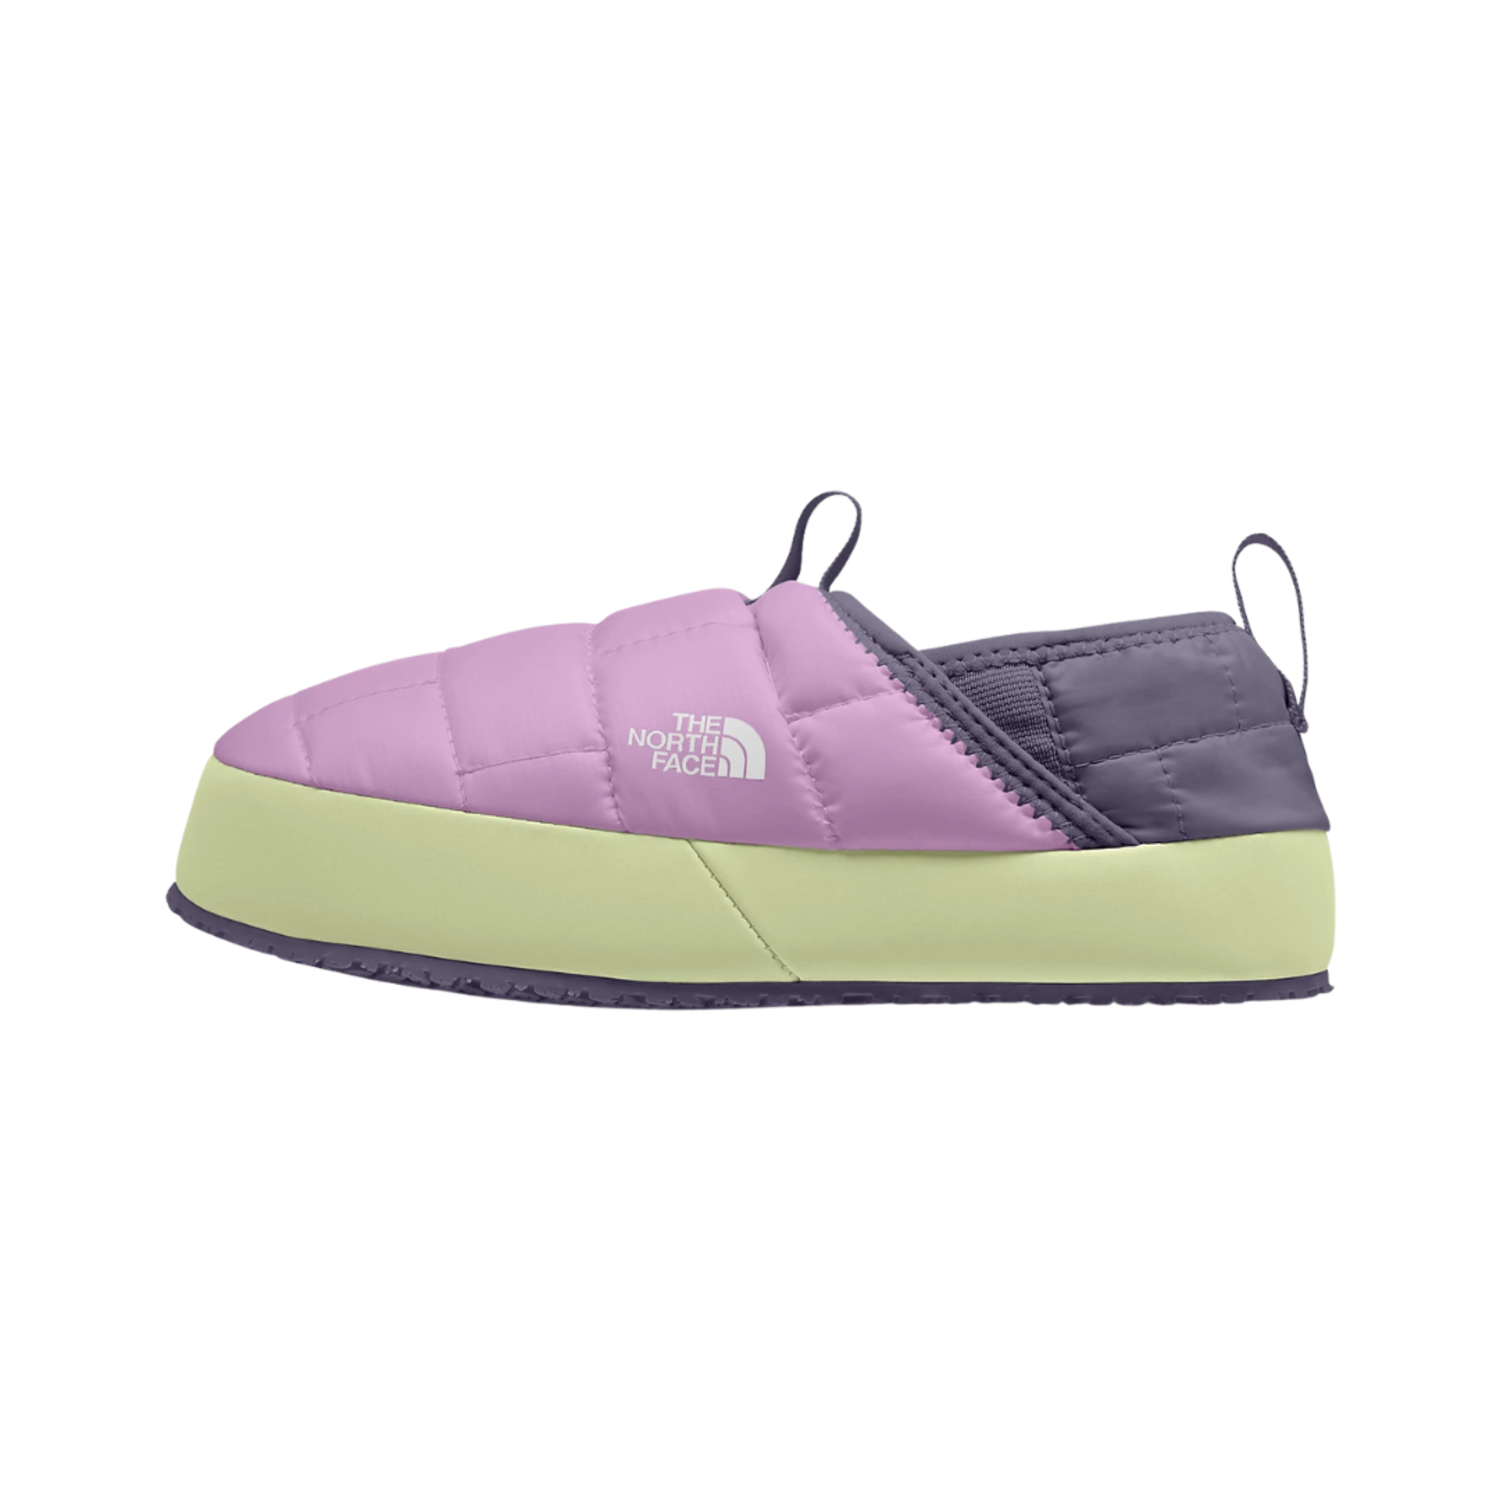 TNF THERMOBALL TRACTION Kid's Mule II - Boutique Les Sommets